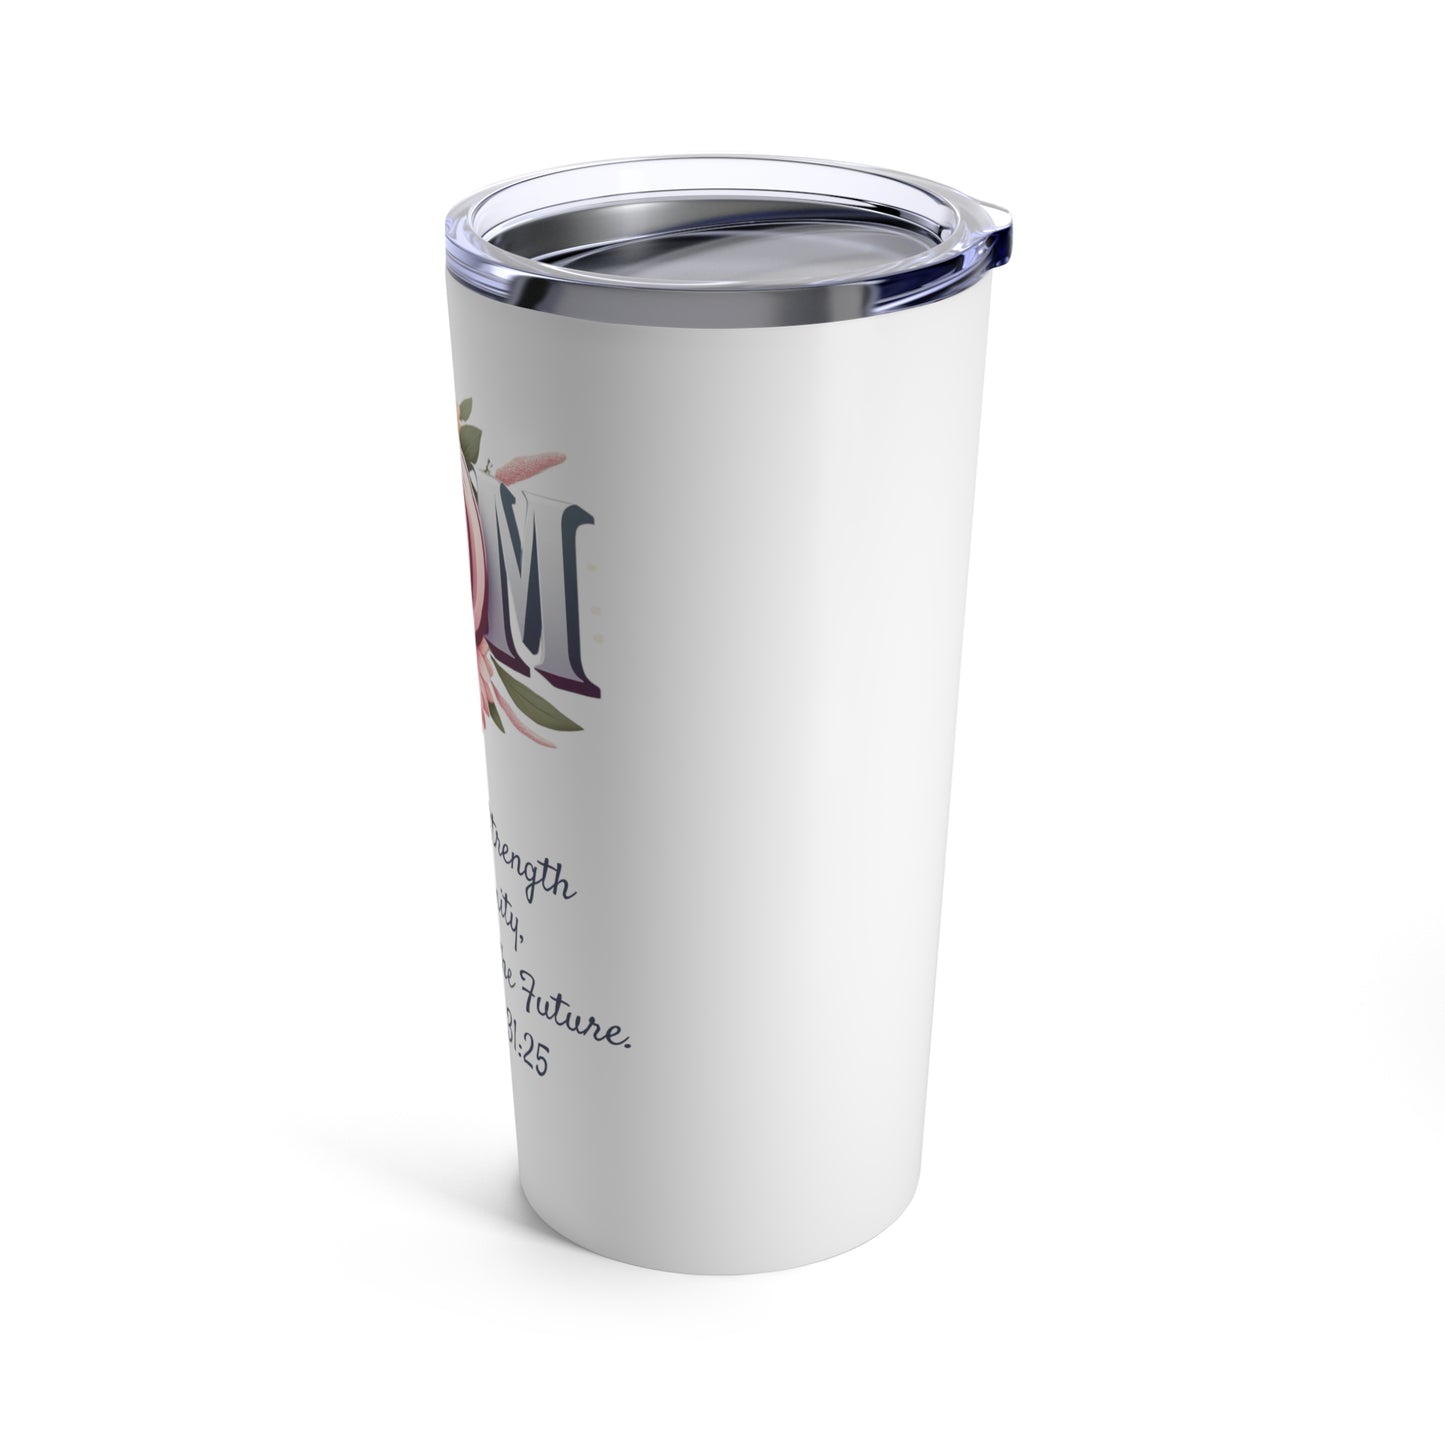 Proverbs 31:2 Double-Wall Insulated Tumbler - Keep Your Faith & Beverages Hot or Cold, Joyous Life Journals